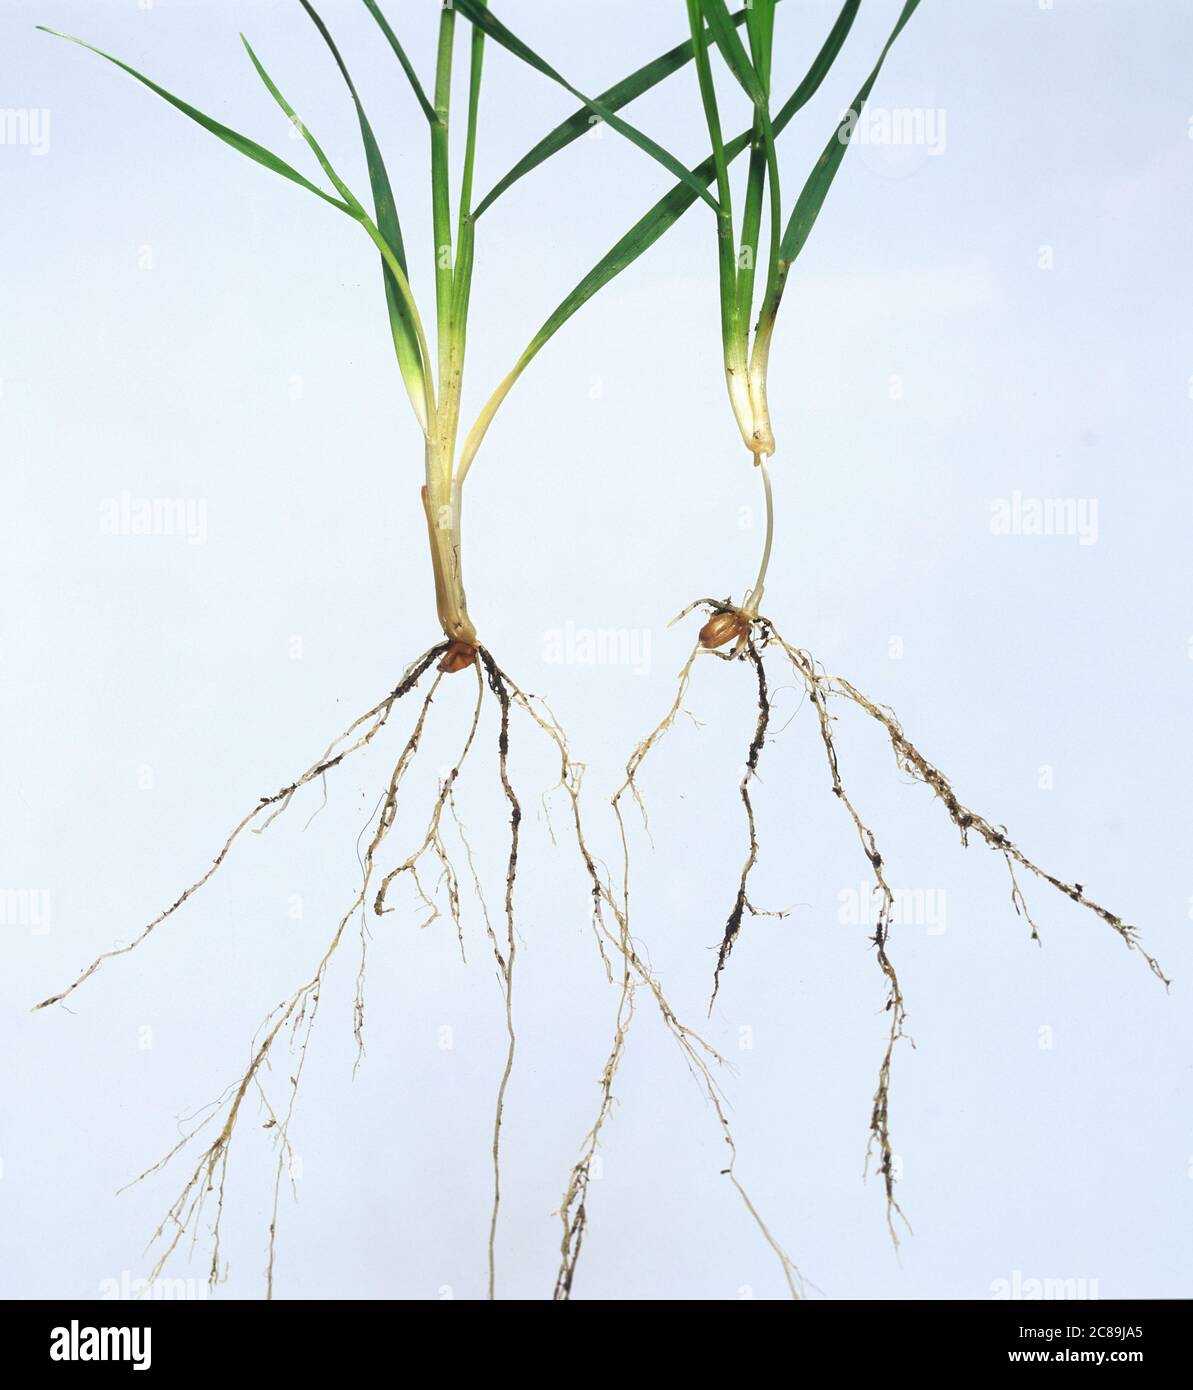 Two wheat plants at growth stage 21 showing long sub-crown internode and no internode from different cultivation regimes Stock Photo